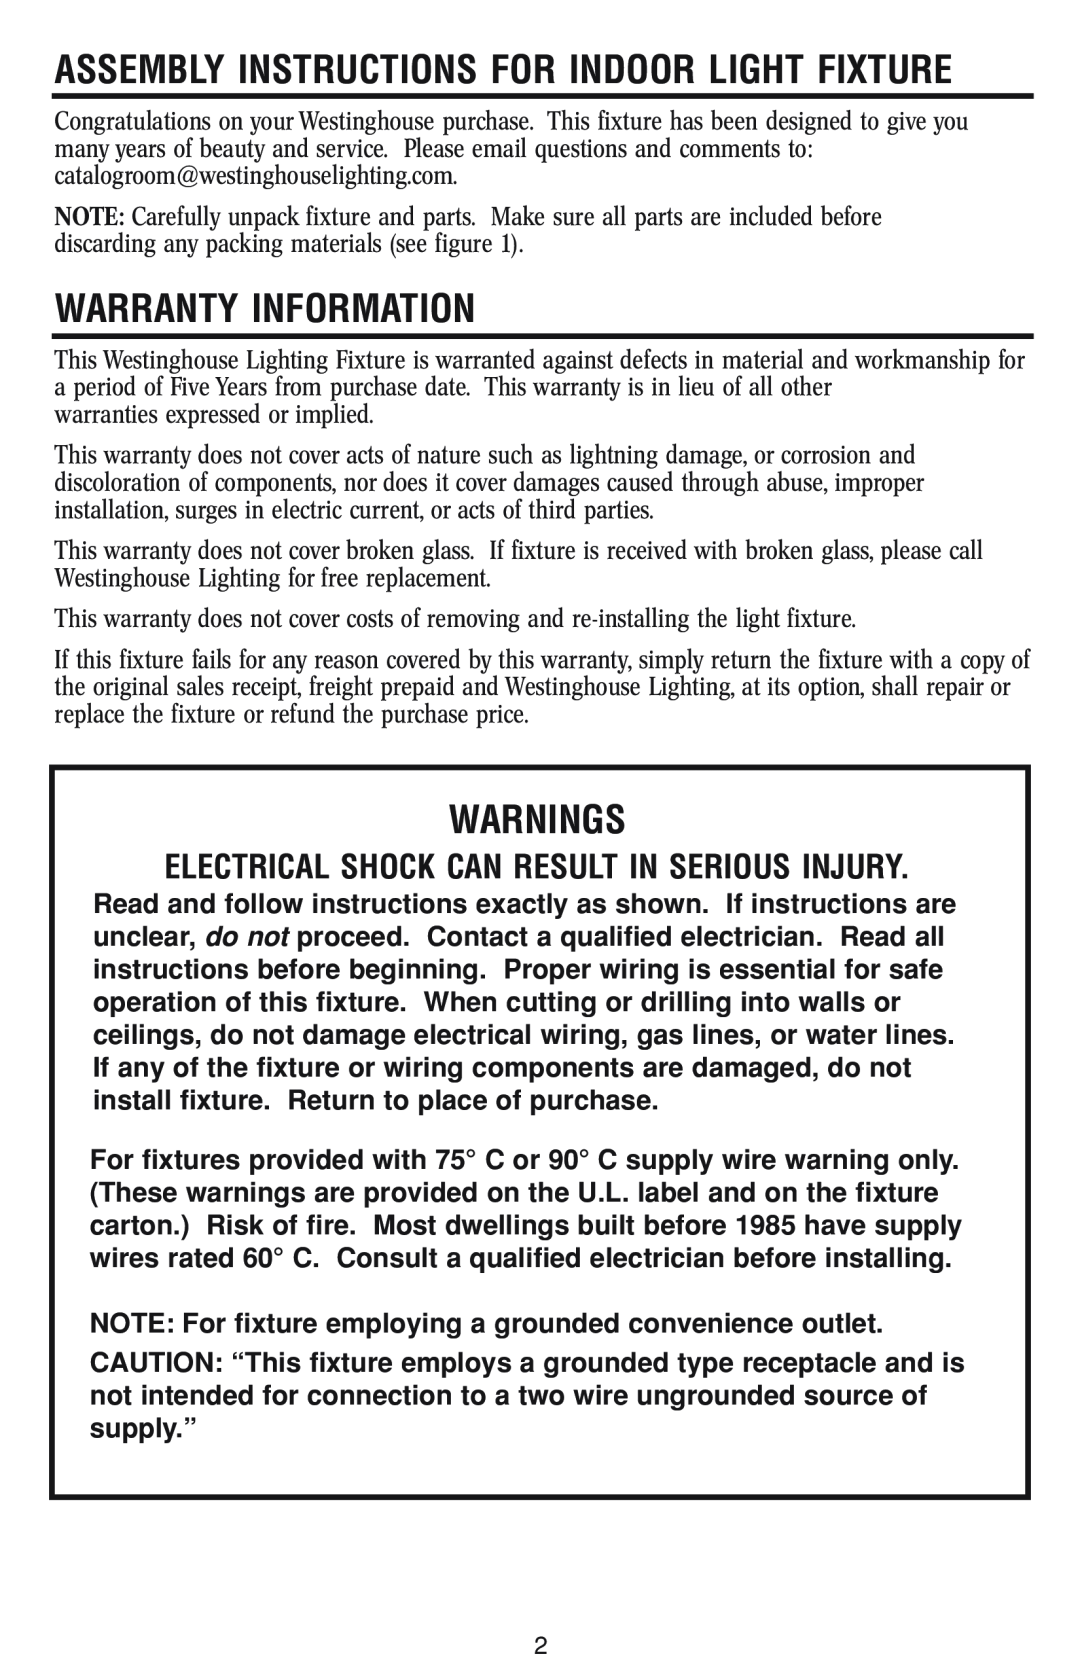 Westinghouse W-012 owner manual Warranty Information, Warnings, Assembly Instructions For Indoor Light Fixture 